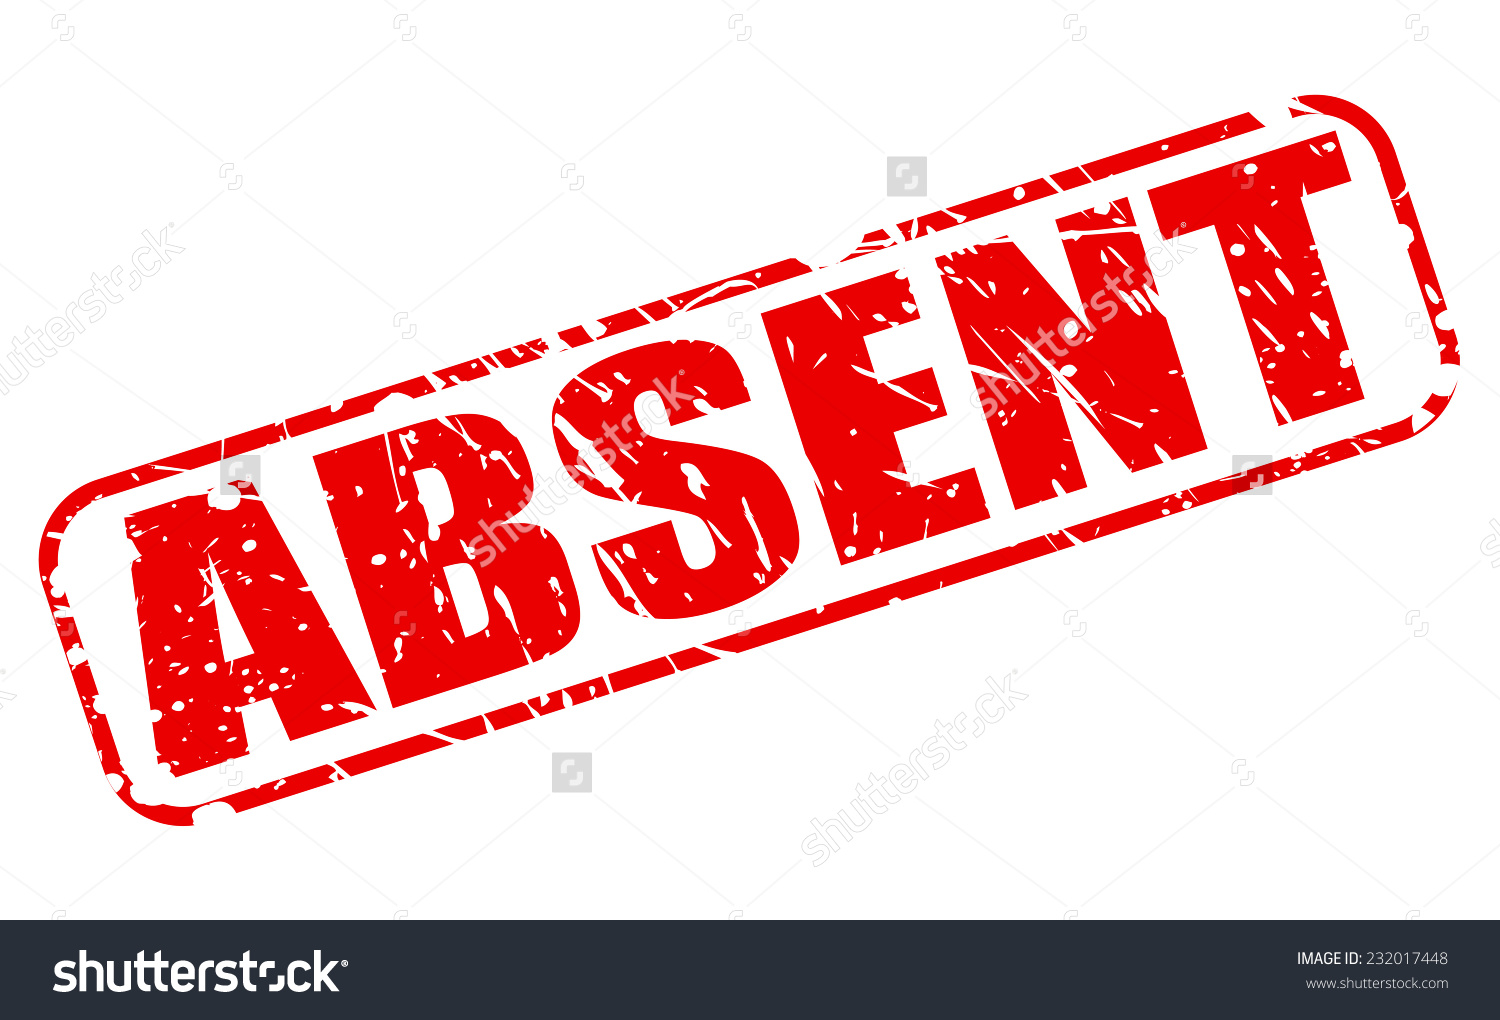 Absence note clipart.